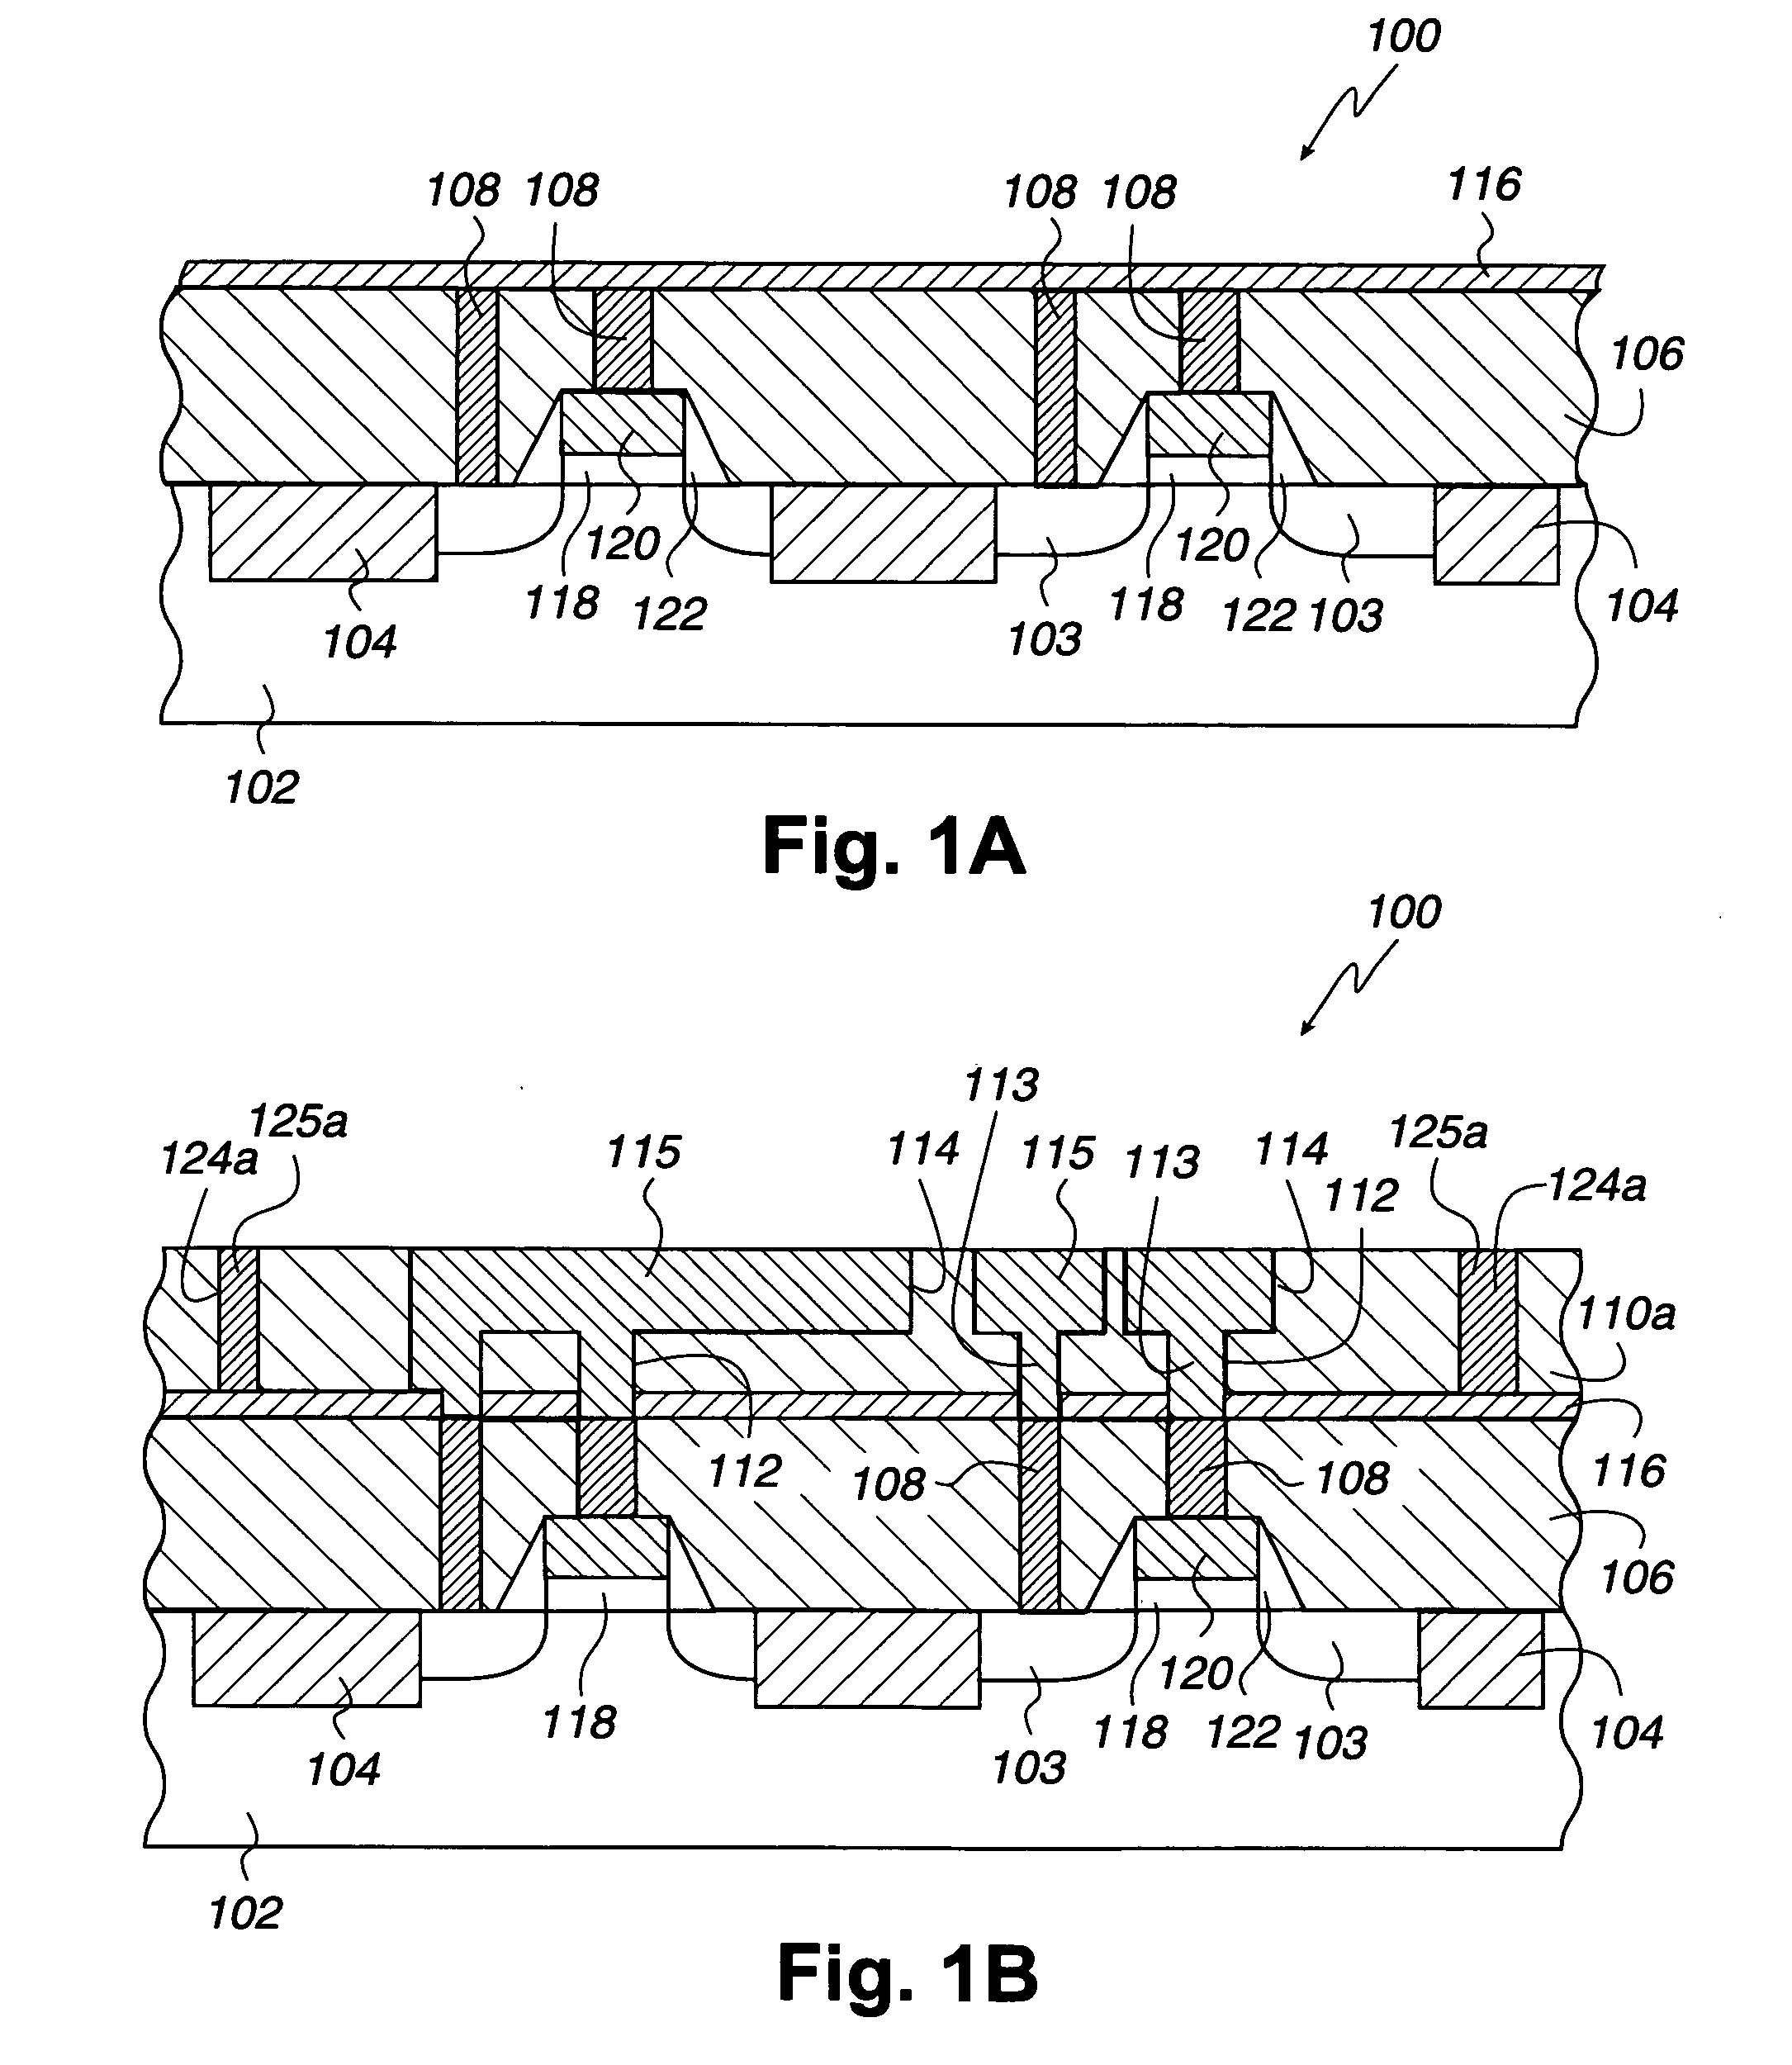 Semiconductor structure implementing low-K dielectric materials and supporting stubs